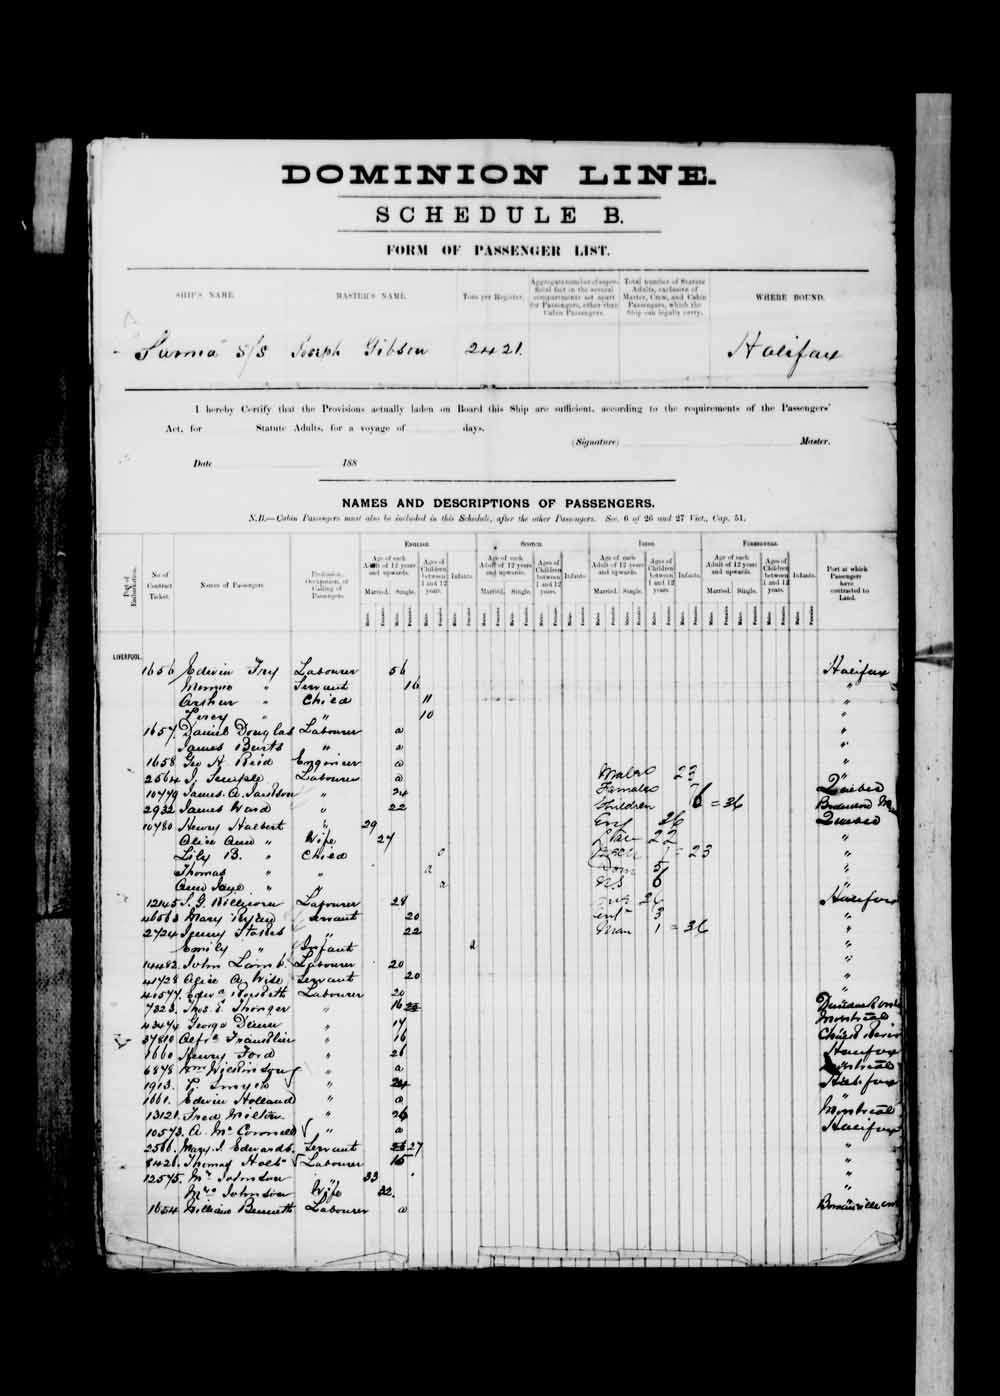 Digitized page of Passenger Lists for Image No.: e003675223